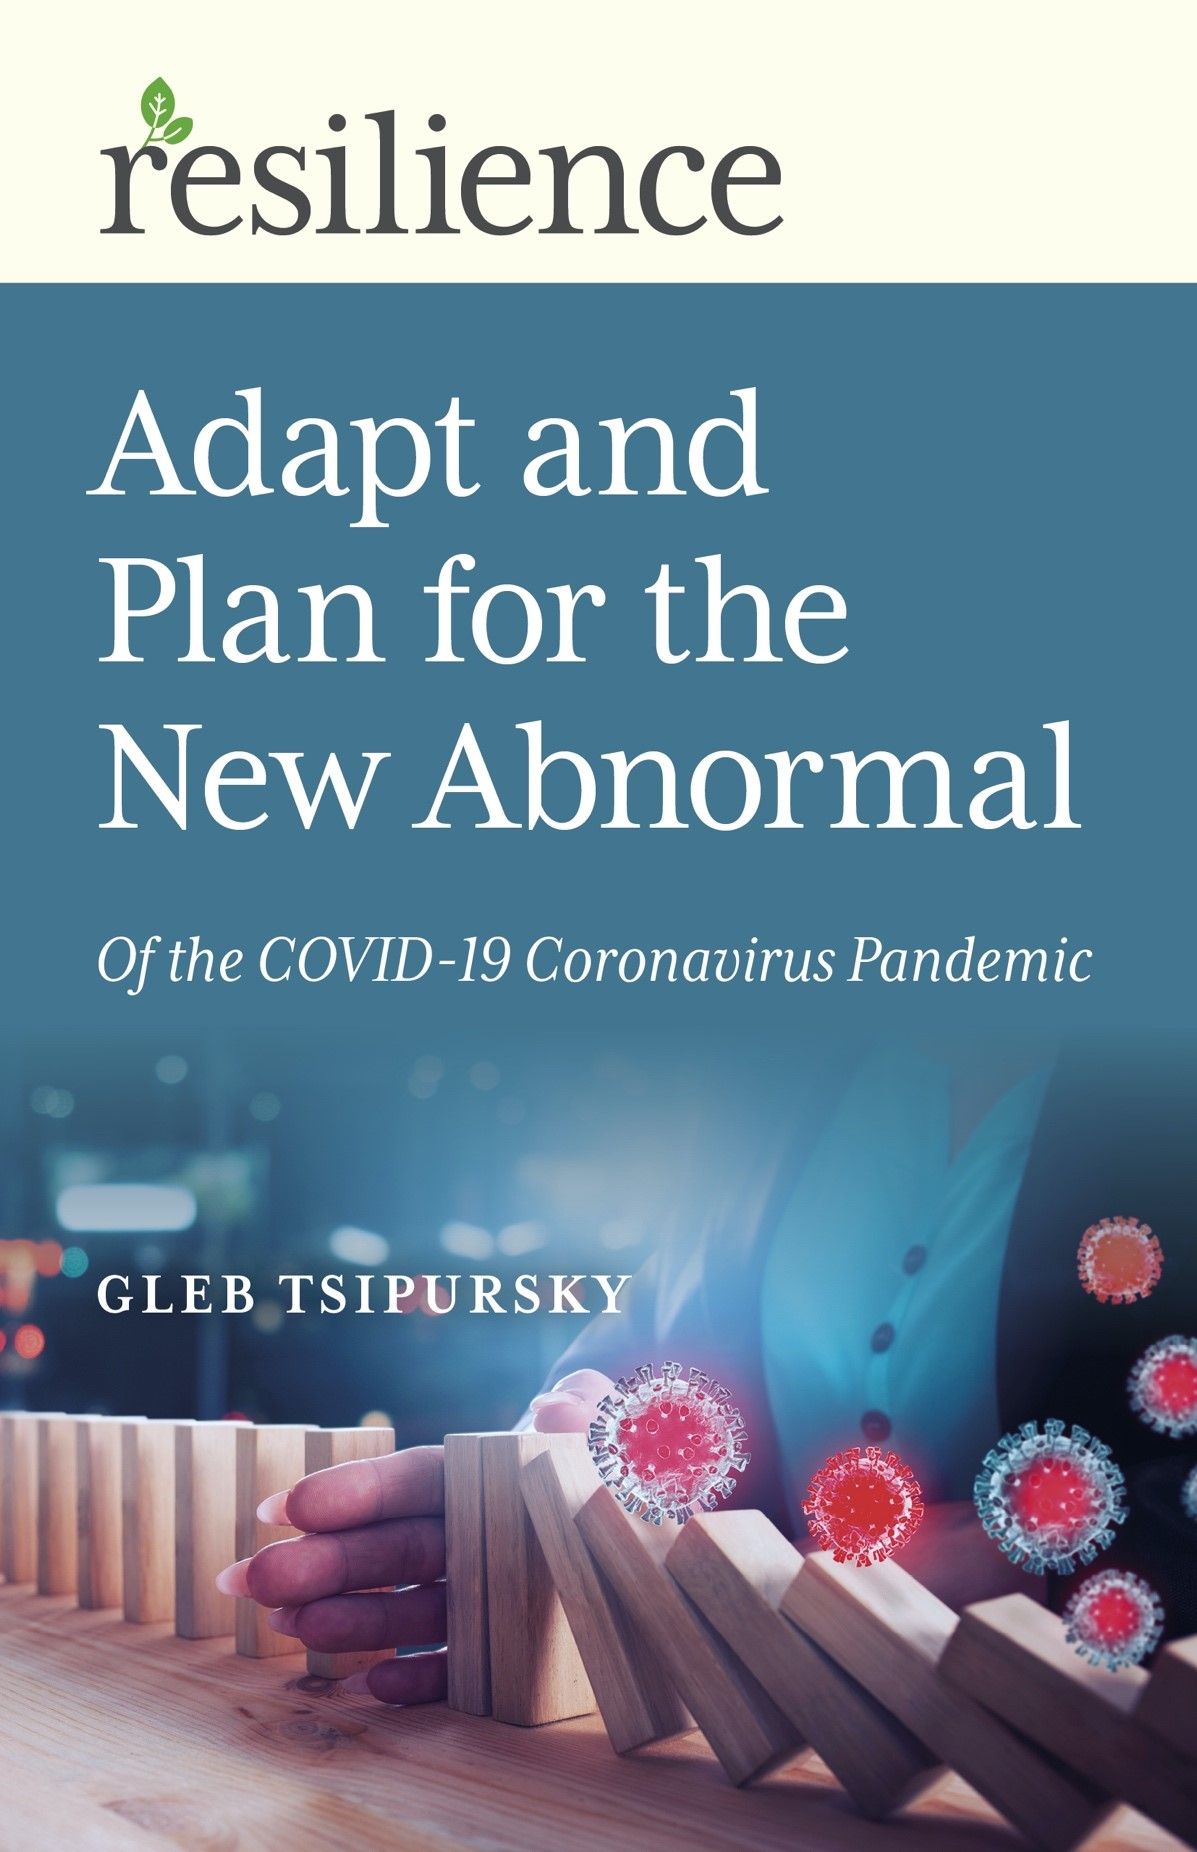 book cover for Resilience: Adapt and Plan for the New Abnormal of the COVID-19 Coronavirus Pandemic